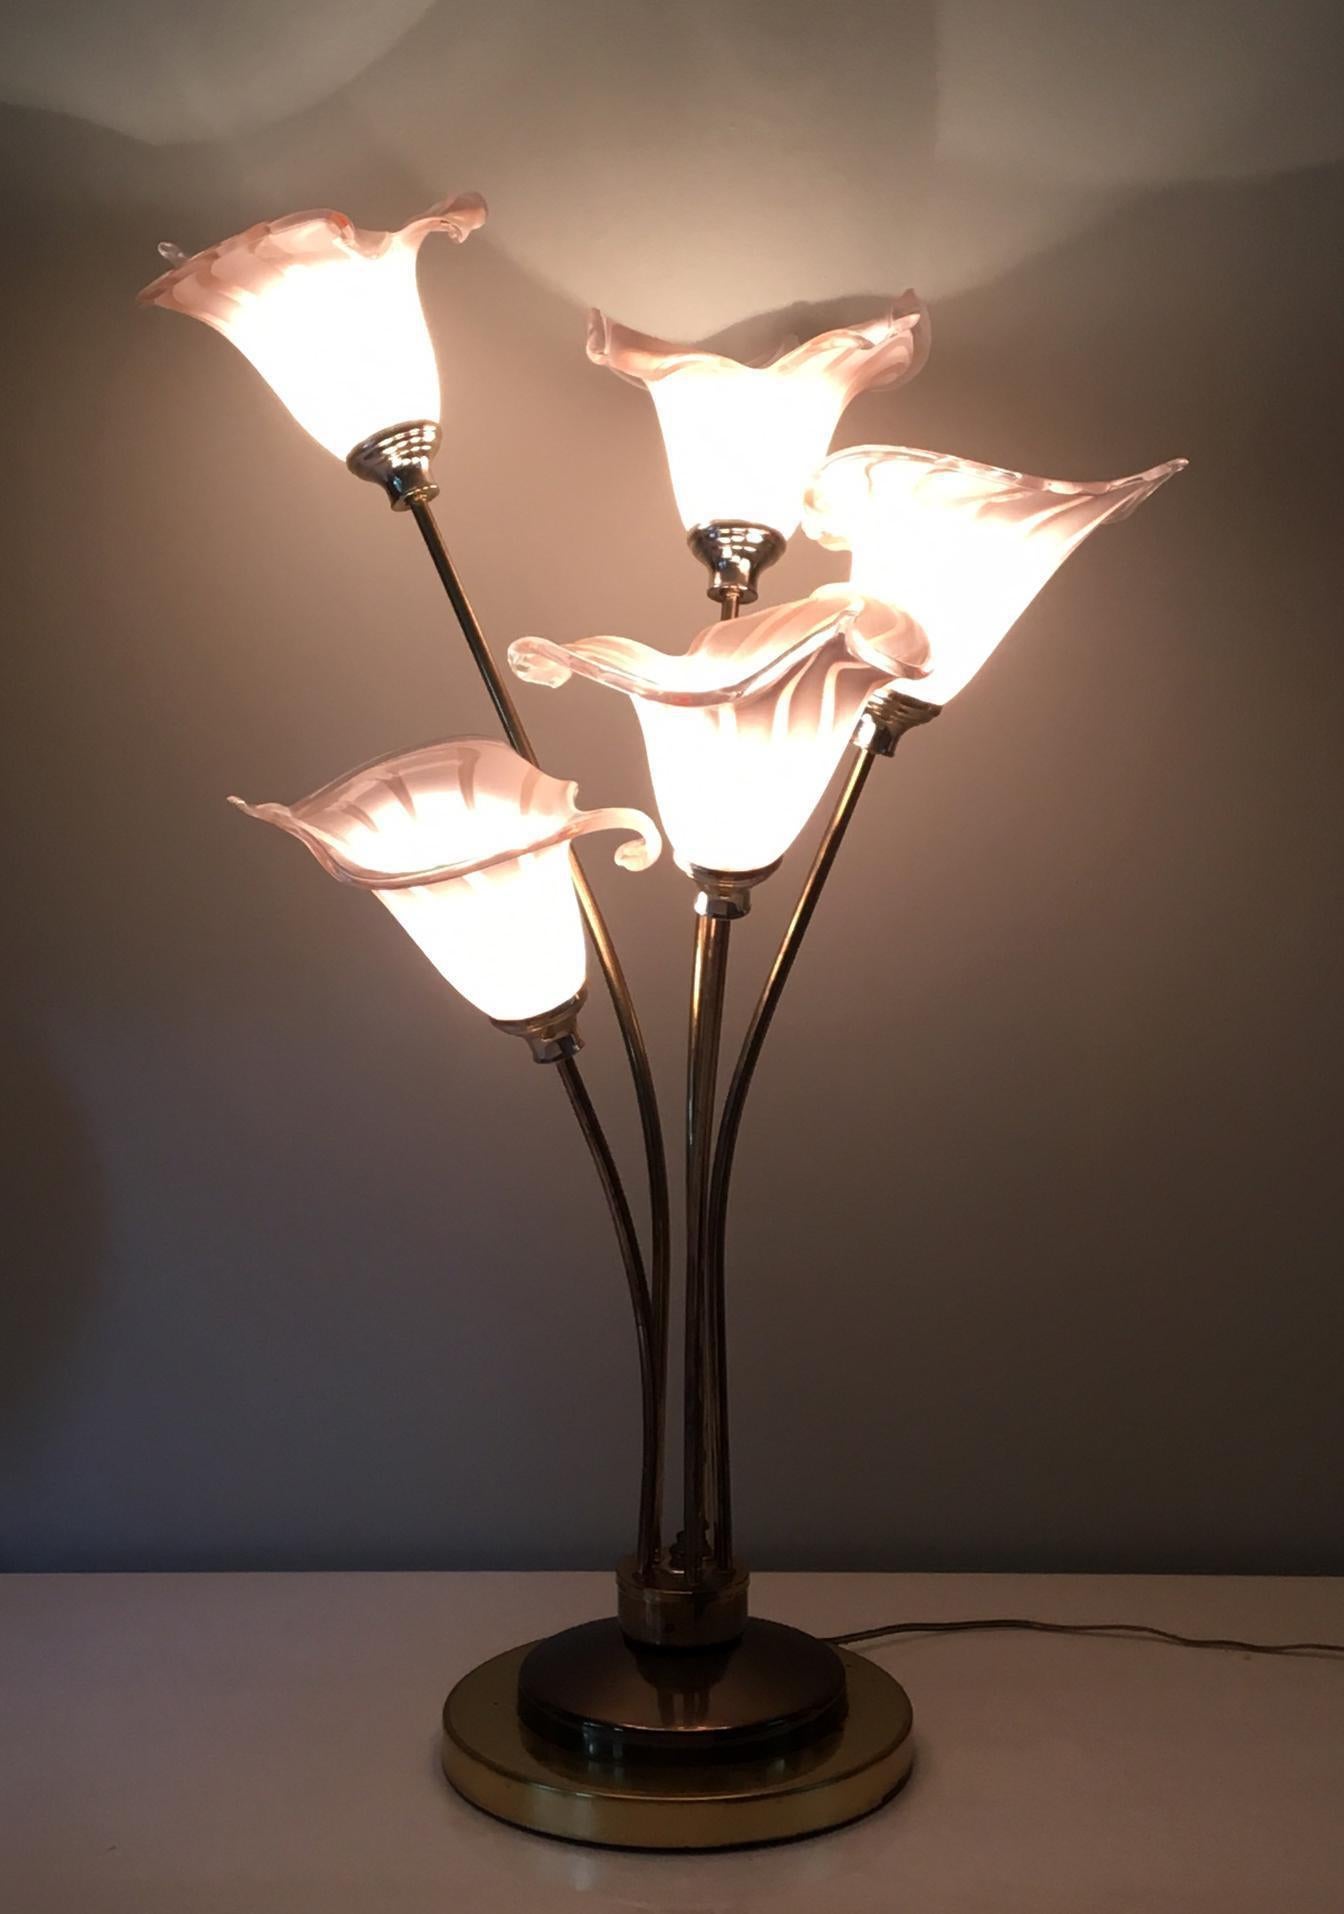 Large glass flower bouquet table lamp by Murano features white and pink hand blown glass Lily flowers and brass stems and base. Good condition with minor wear consistent with age.